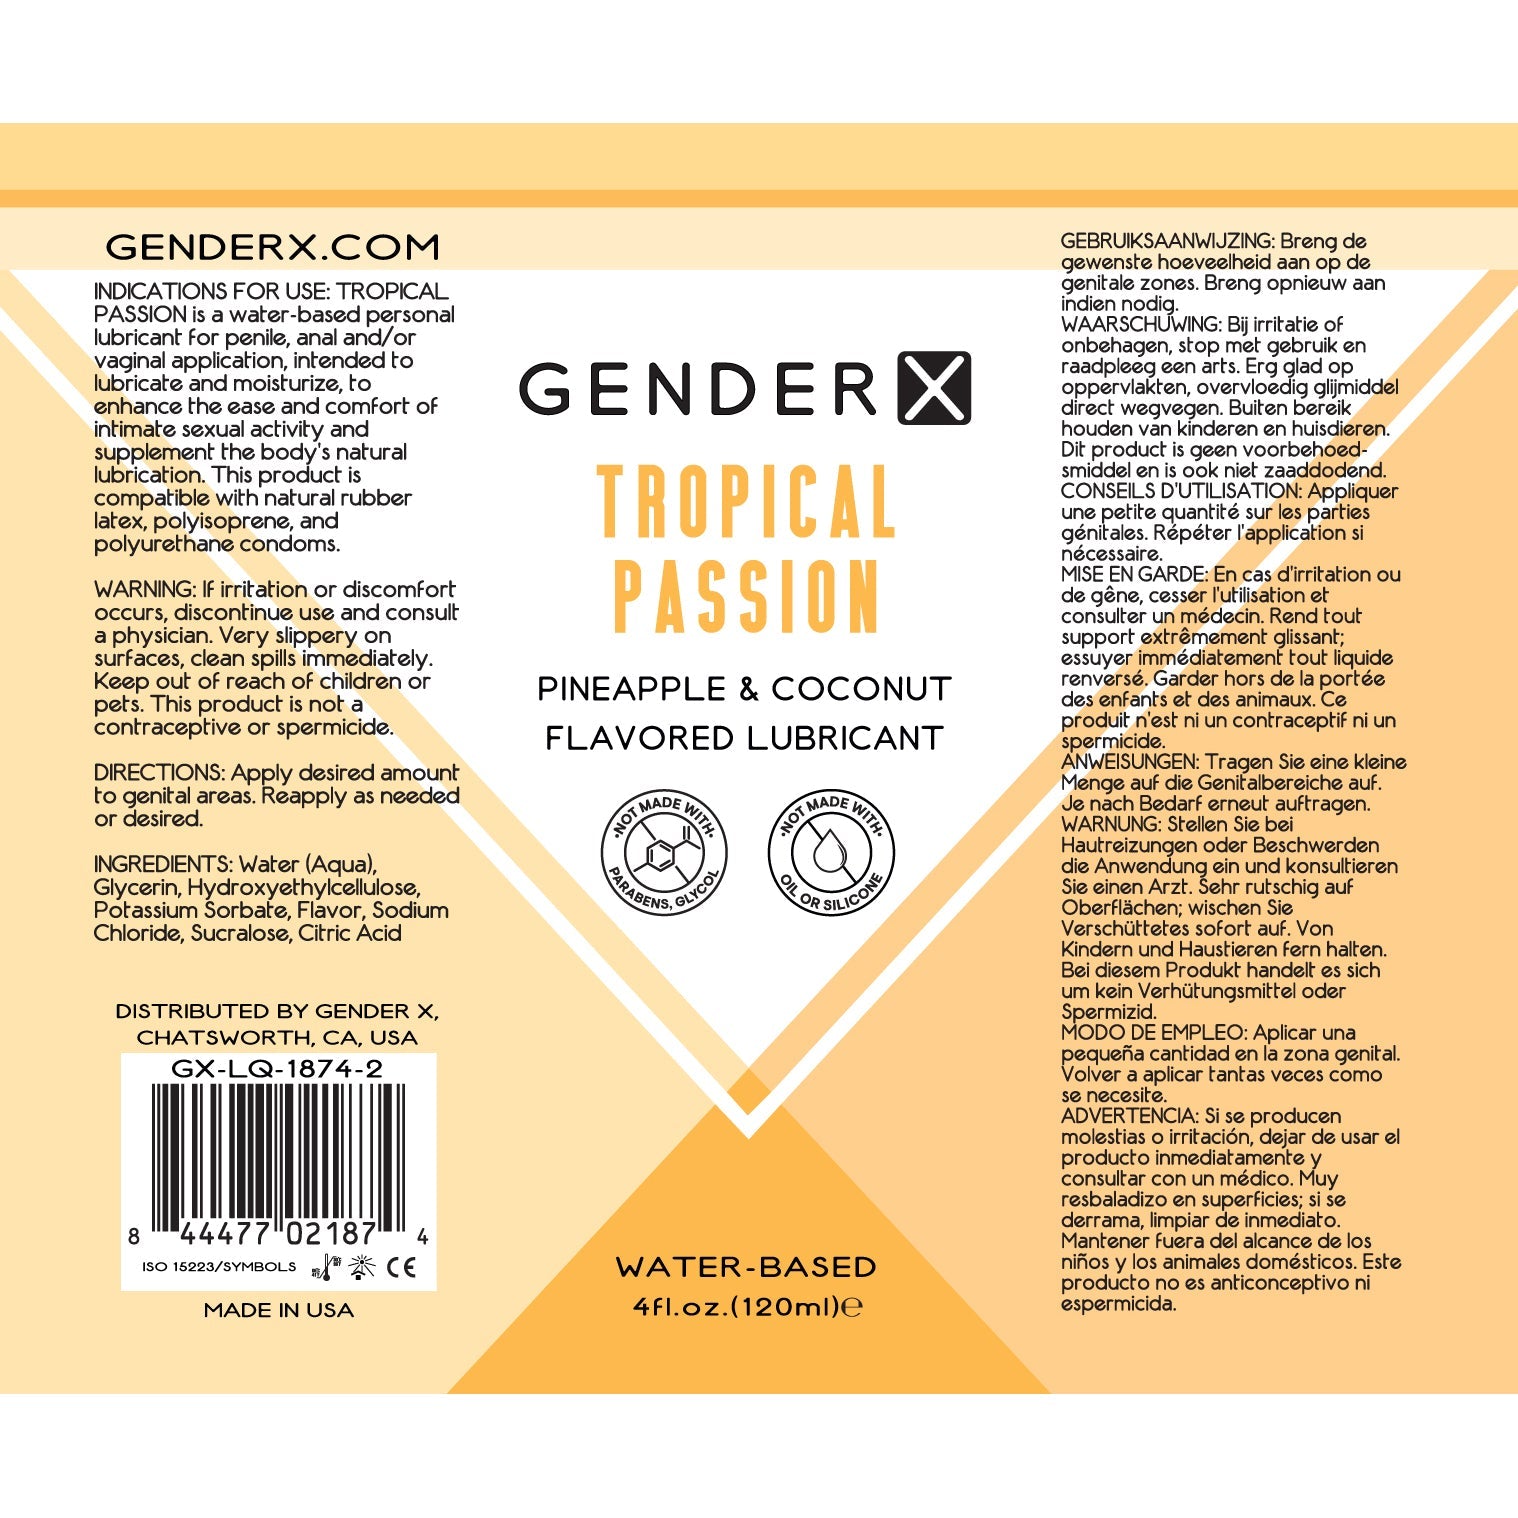 Evolved - Gender X Tropical Passion Pineapple and Coconut Flavored Lube